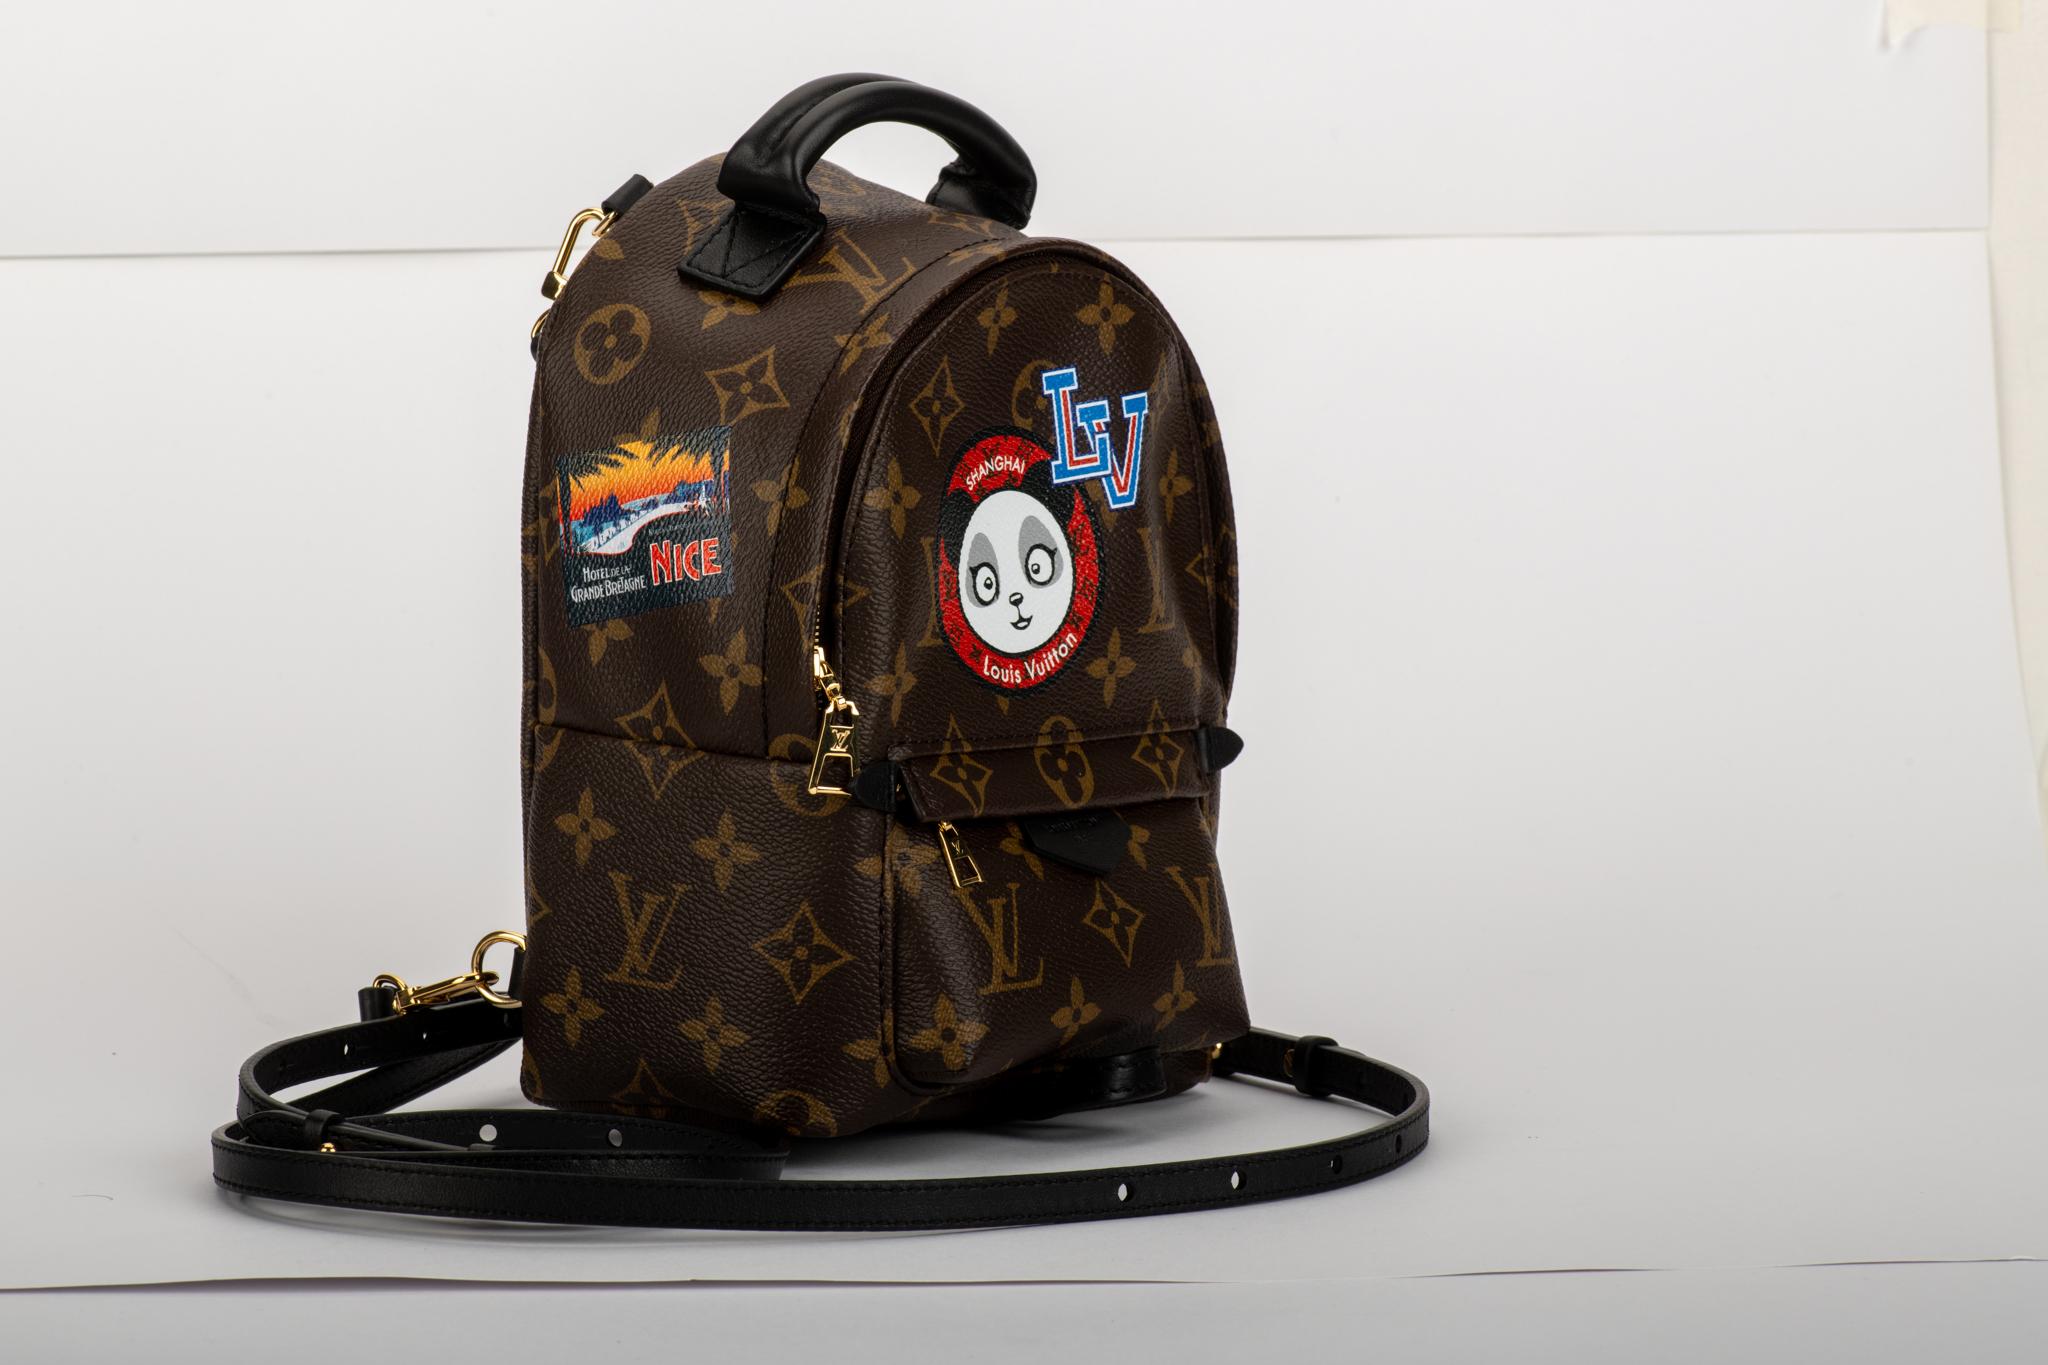 Louis Vuitton limited edition custom order travel stickers mini backpack. Monogram signature canvas with black leather straps. External zipped pocket, internal open pocket. Comes with serial number, dust cover and box.
